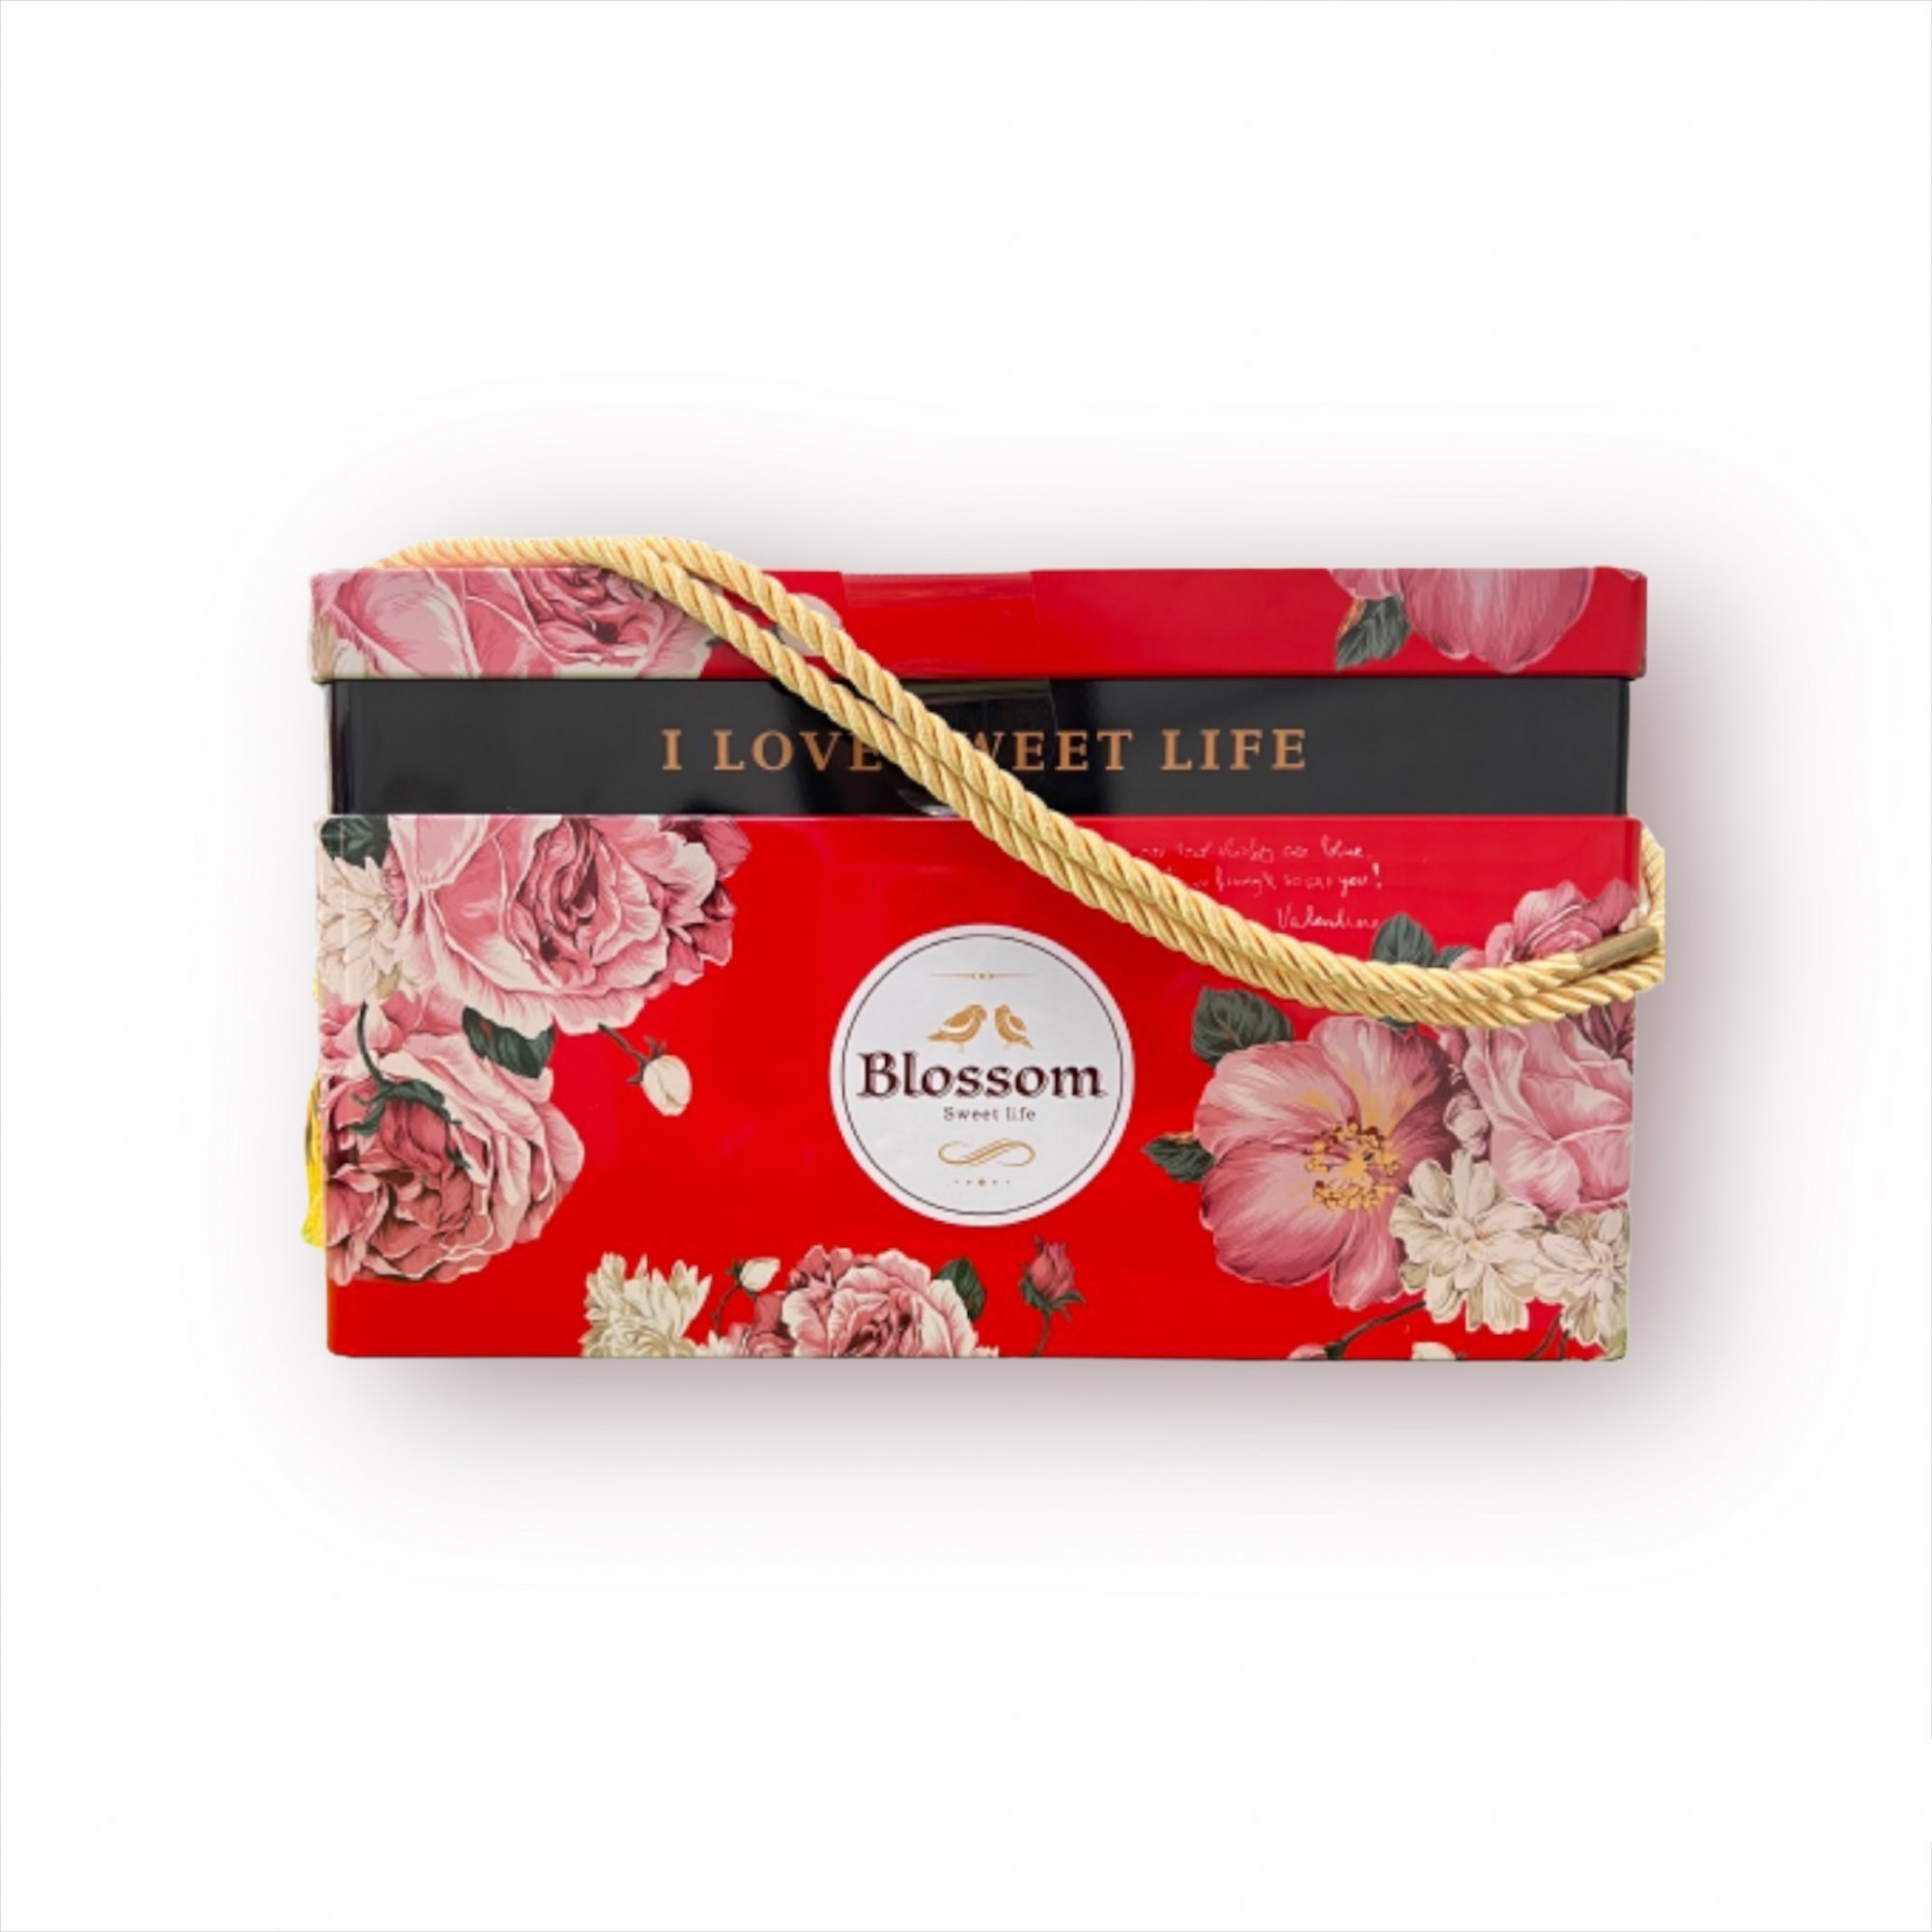 Bánh Quy Hộp Thiết Blossom - I Love Sweet Life 628g